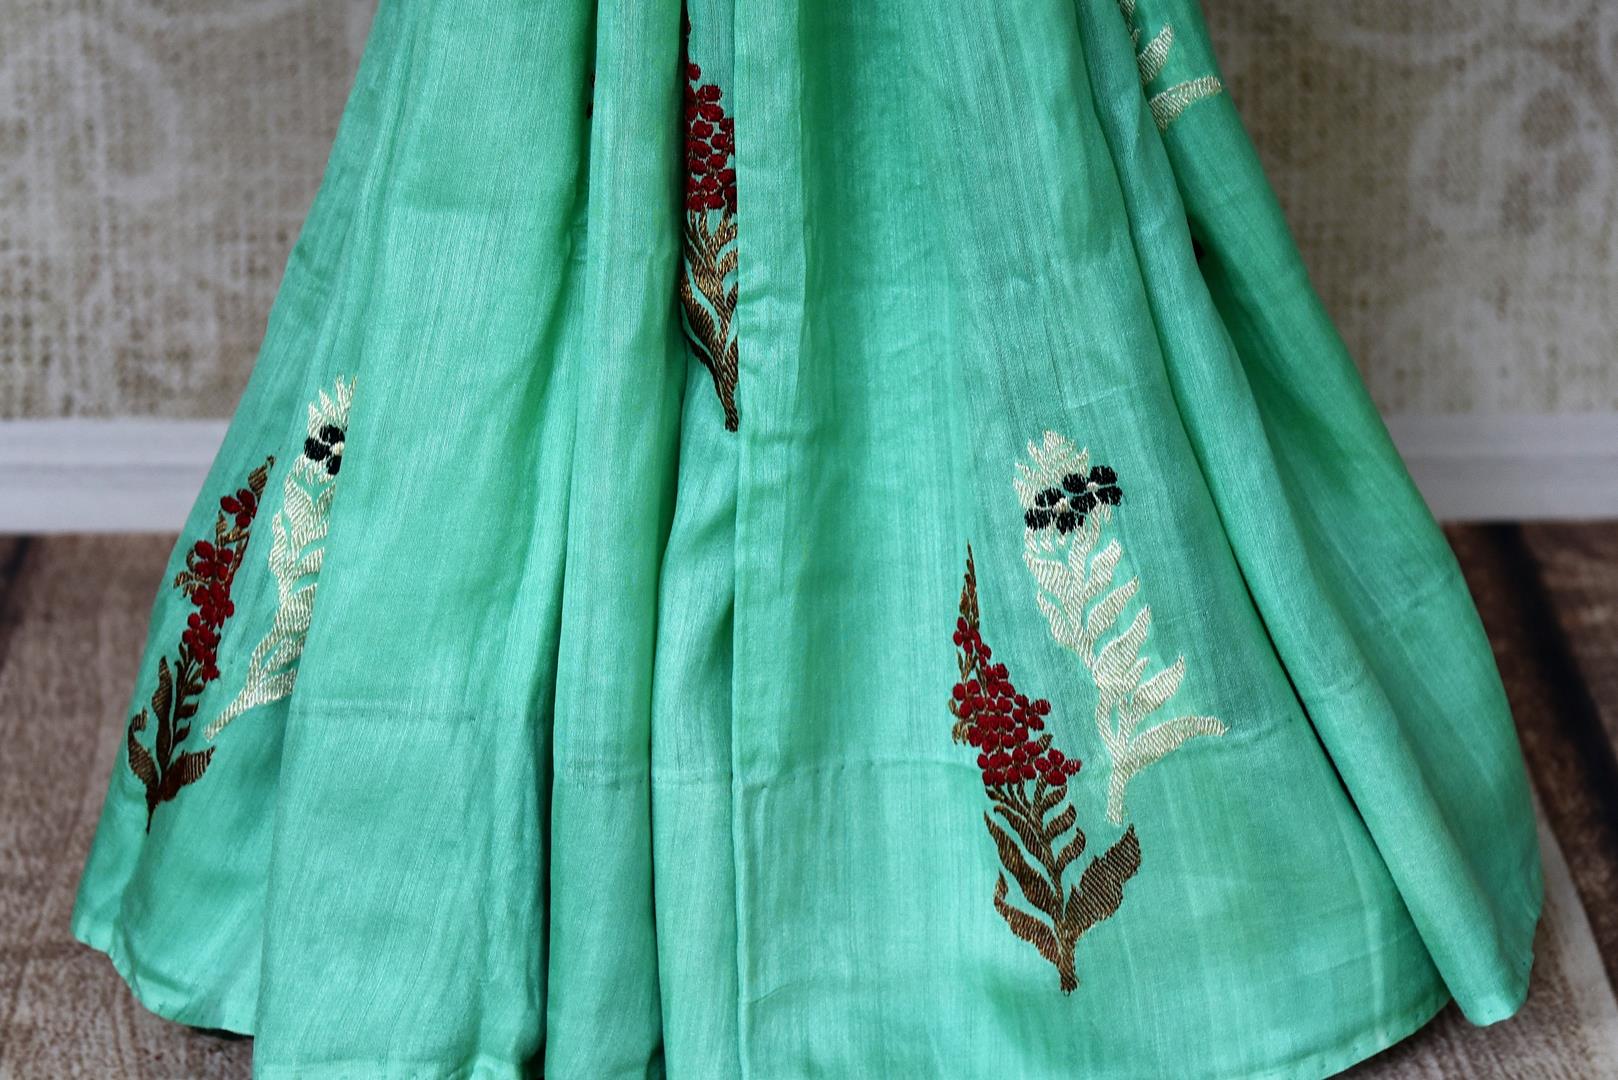 Buy pastel green muga Banarasi sari online in USA with floral buta from Pure Elegance online store. Visit our exclusive Indian clothing store in USA and get floored by a range of exquisite Indian Kanjivaram saris, Banarasi sarees, silk sarees, Indian jewelry and much more to complete your ethnic look.-pleatx